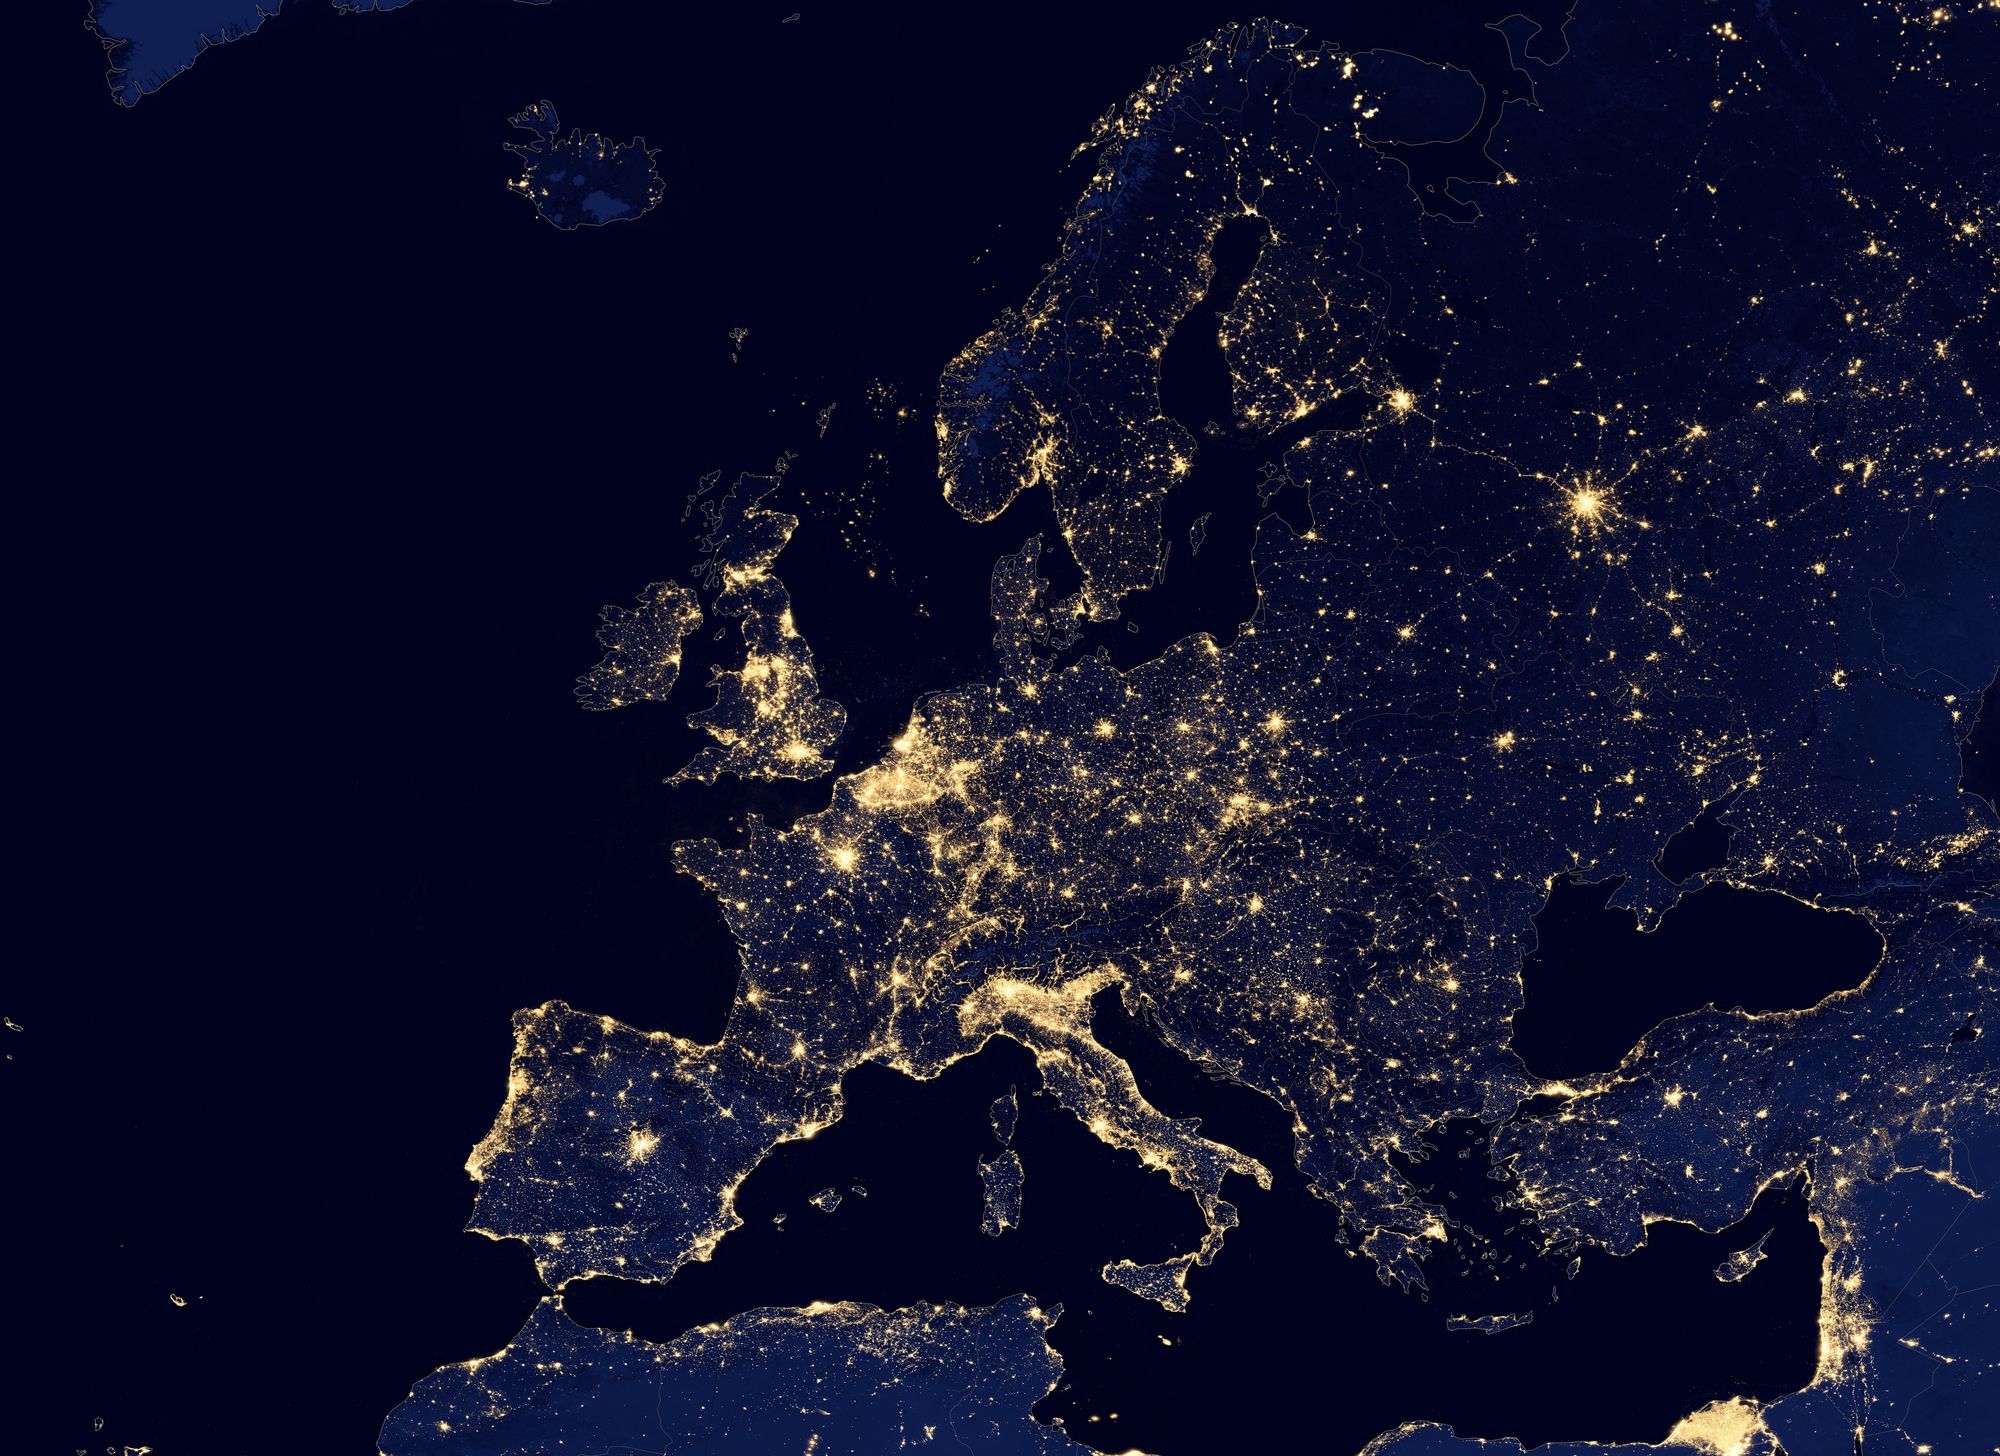 With $3tn in value created, European tech is just getting started